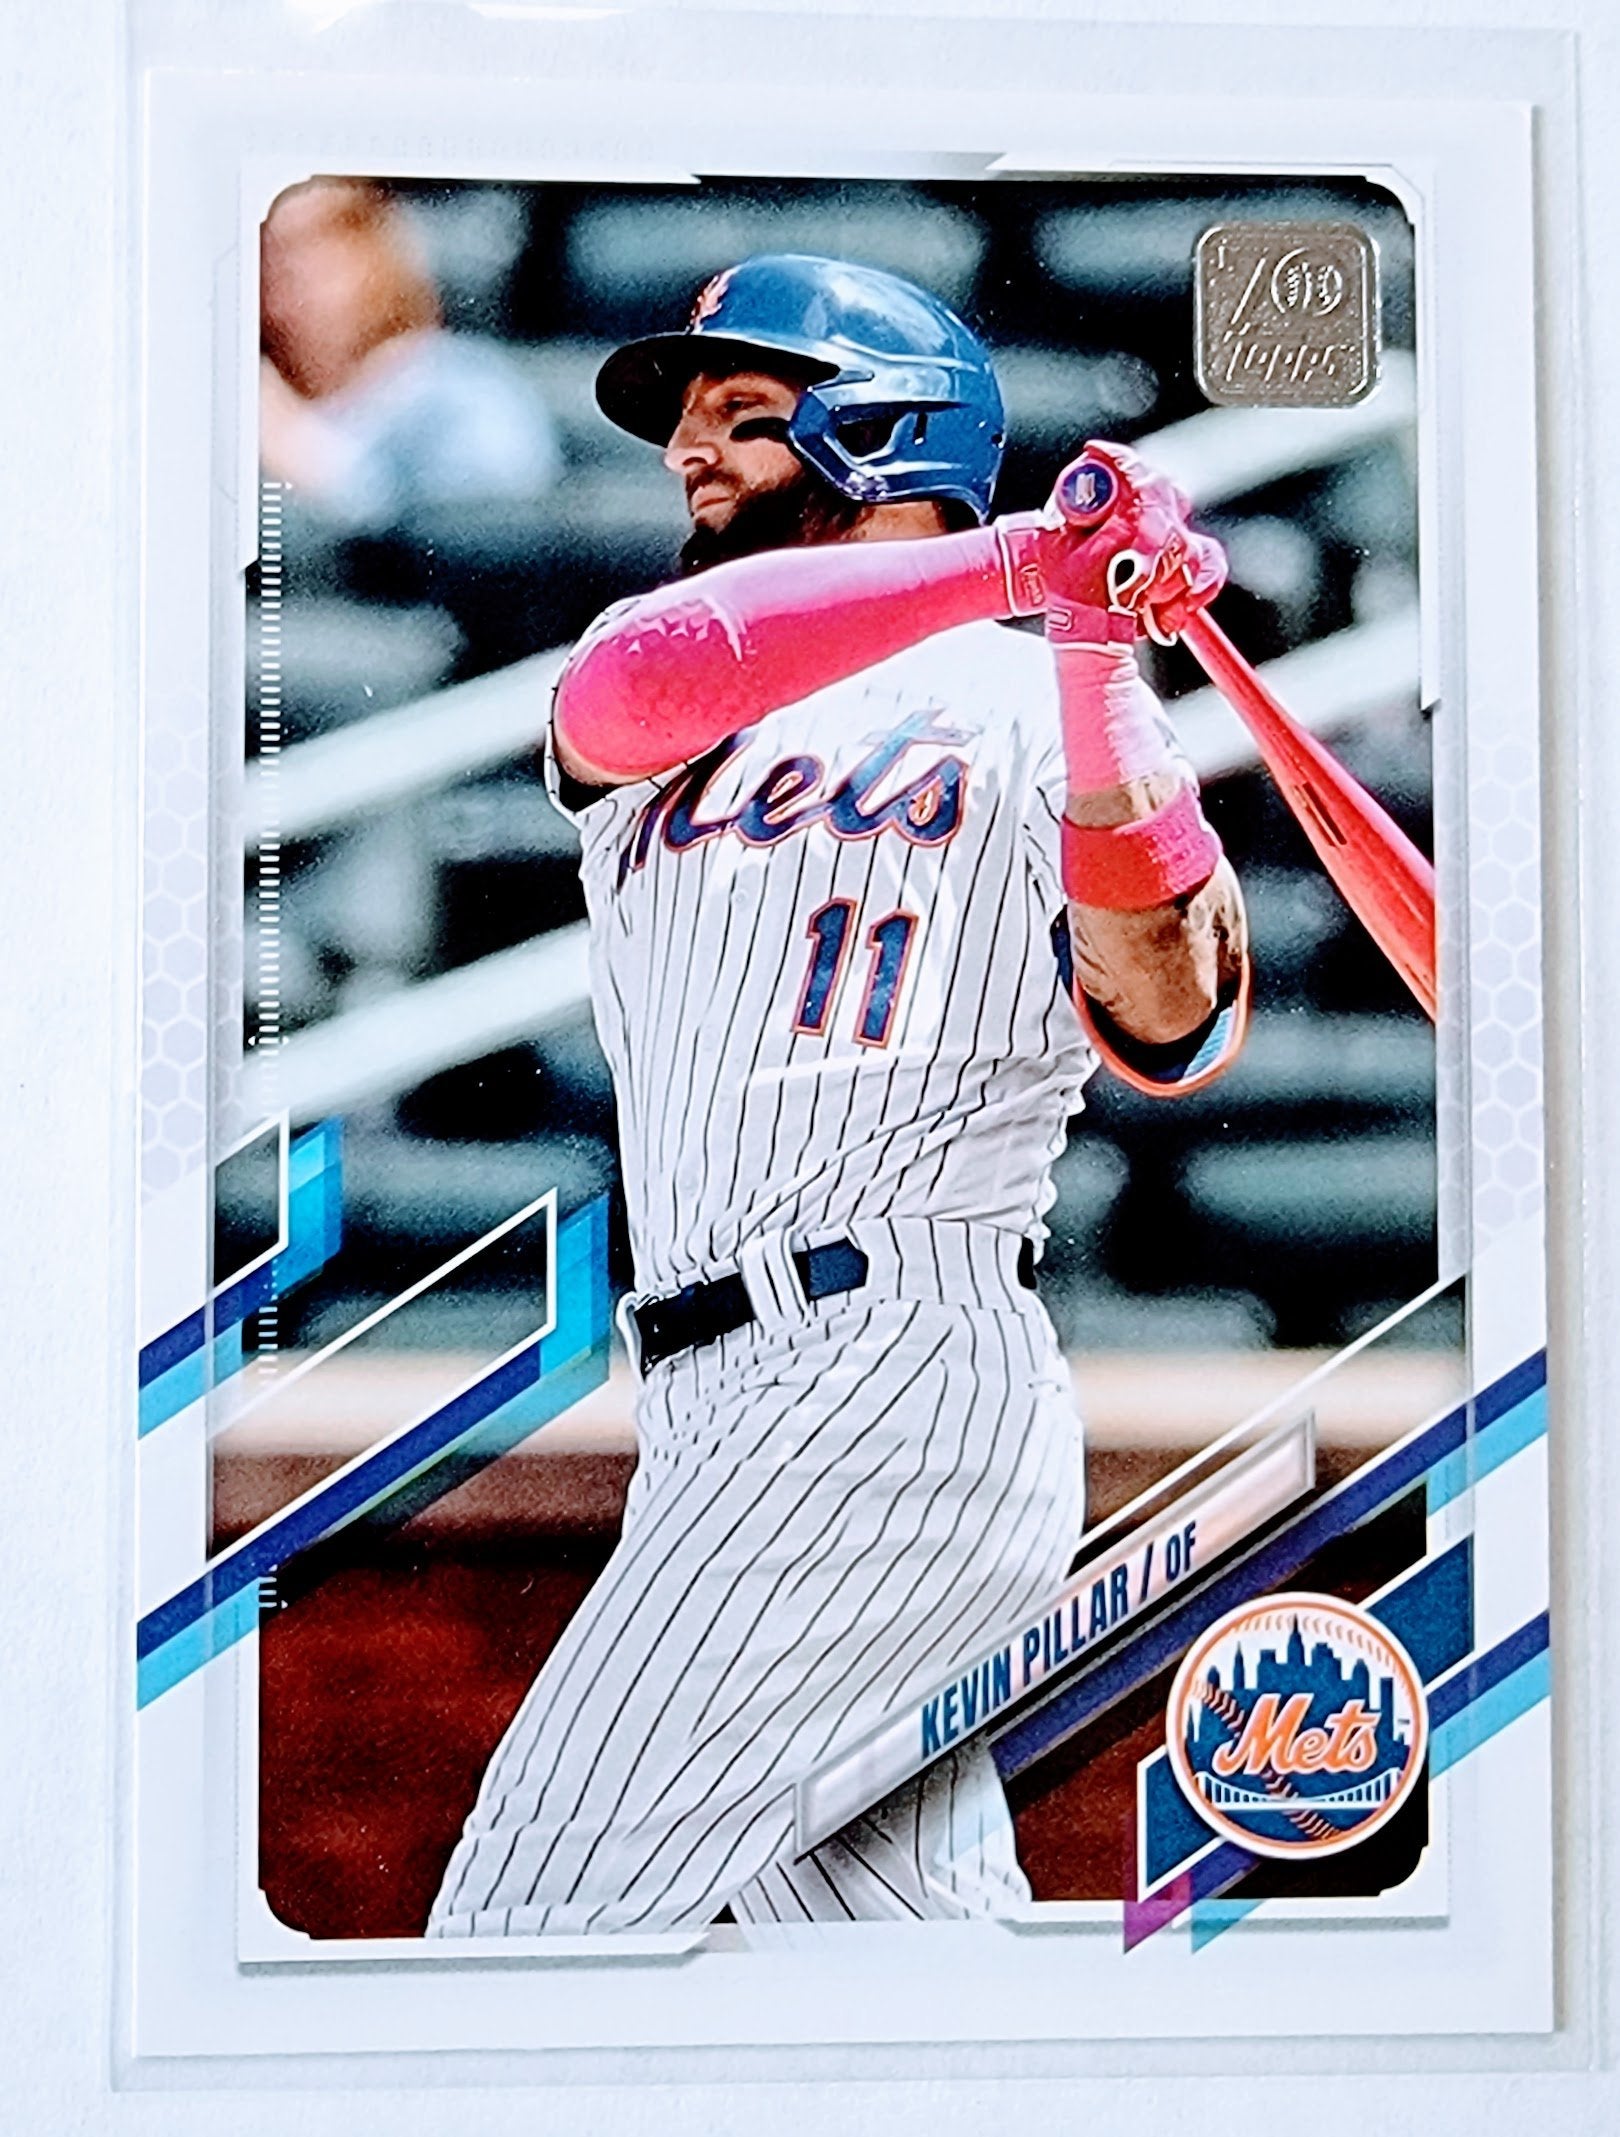 2021 Topps Update Kevin Pillar Baseball Trading Card SMCB1 simple Xclusive Collectibles   